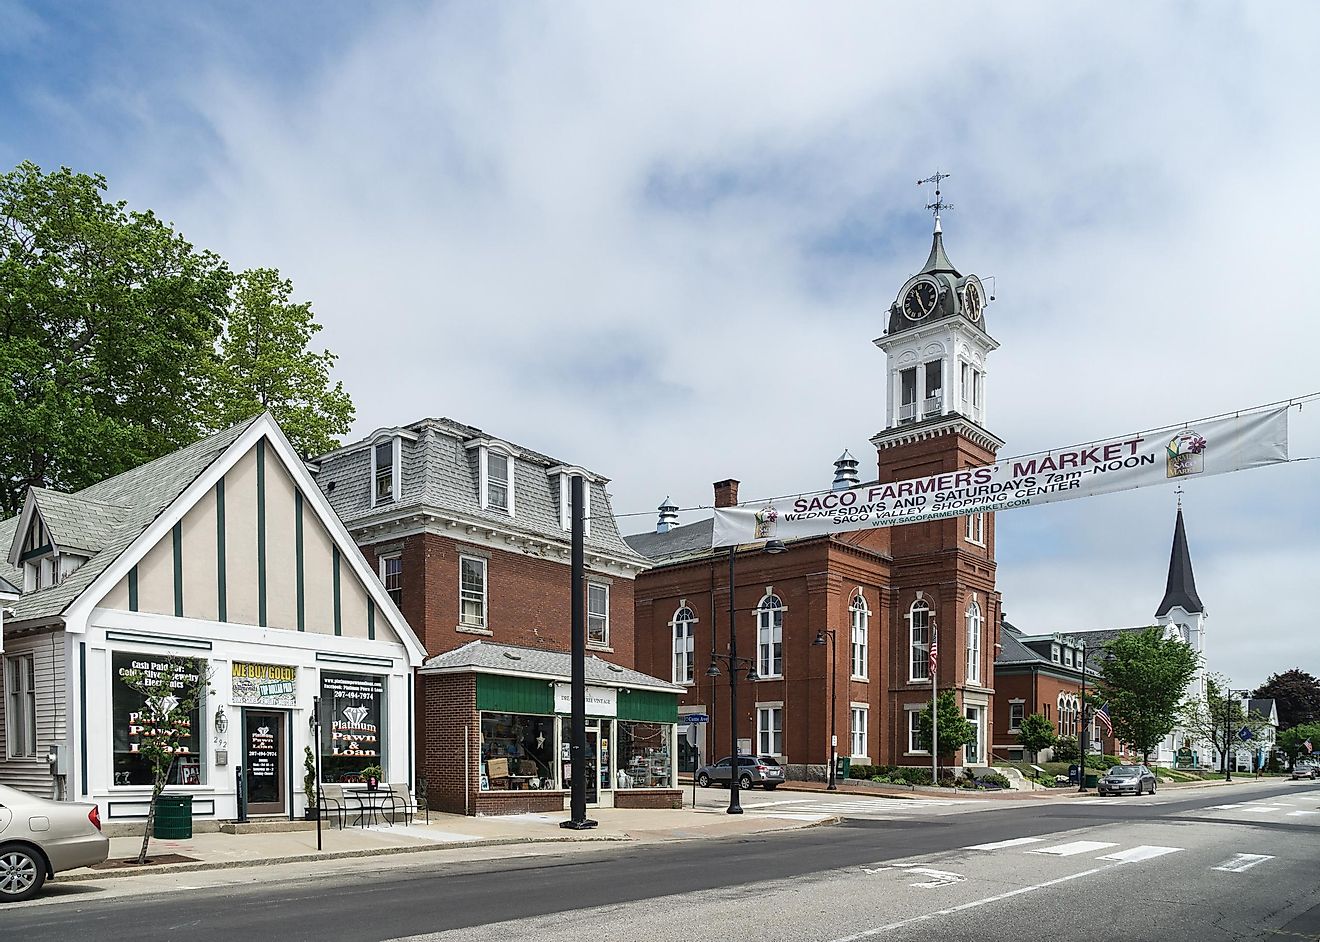 View of Main Street in Saco, Maine by Kenneth C. Zirkel - Own work